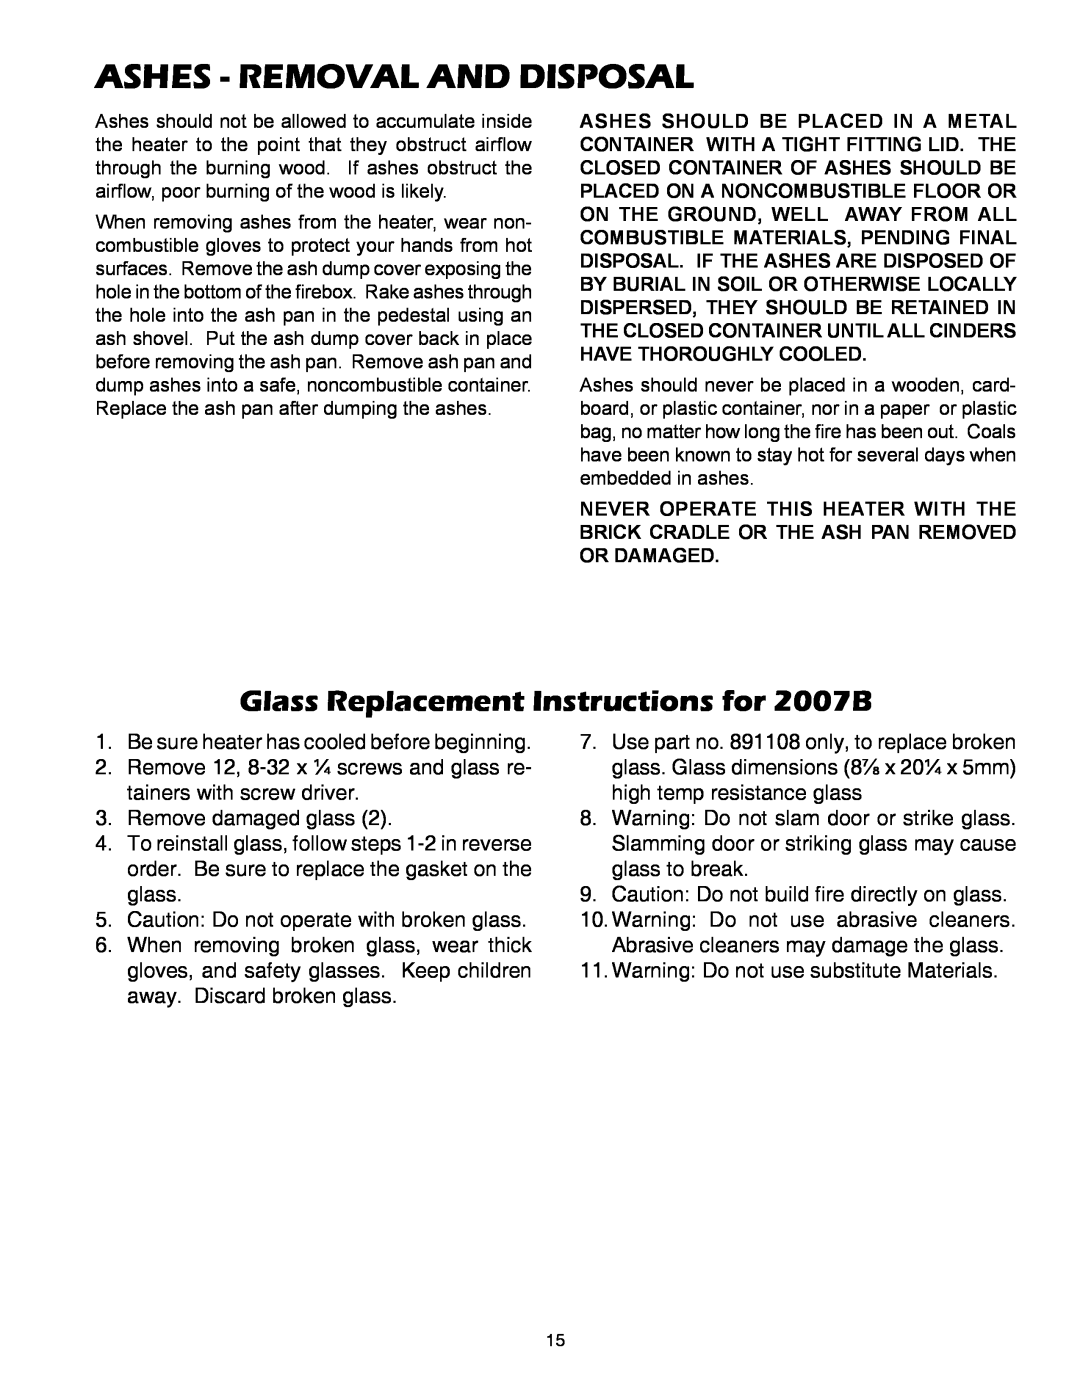 United States Stove owner manual Ashes - Removal And Disposal, Glass Replacement Instructions for 2007B 